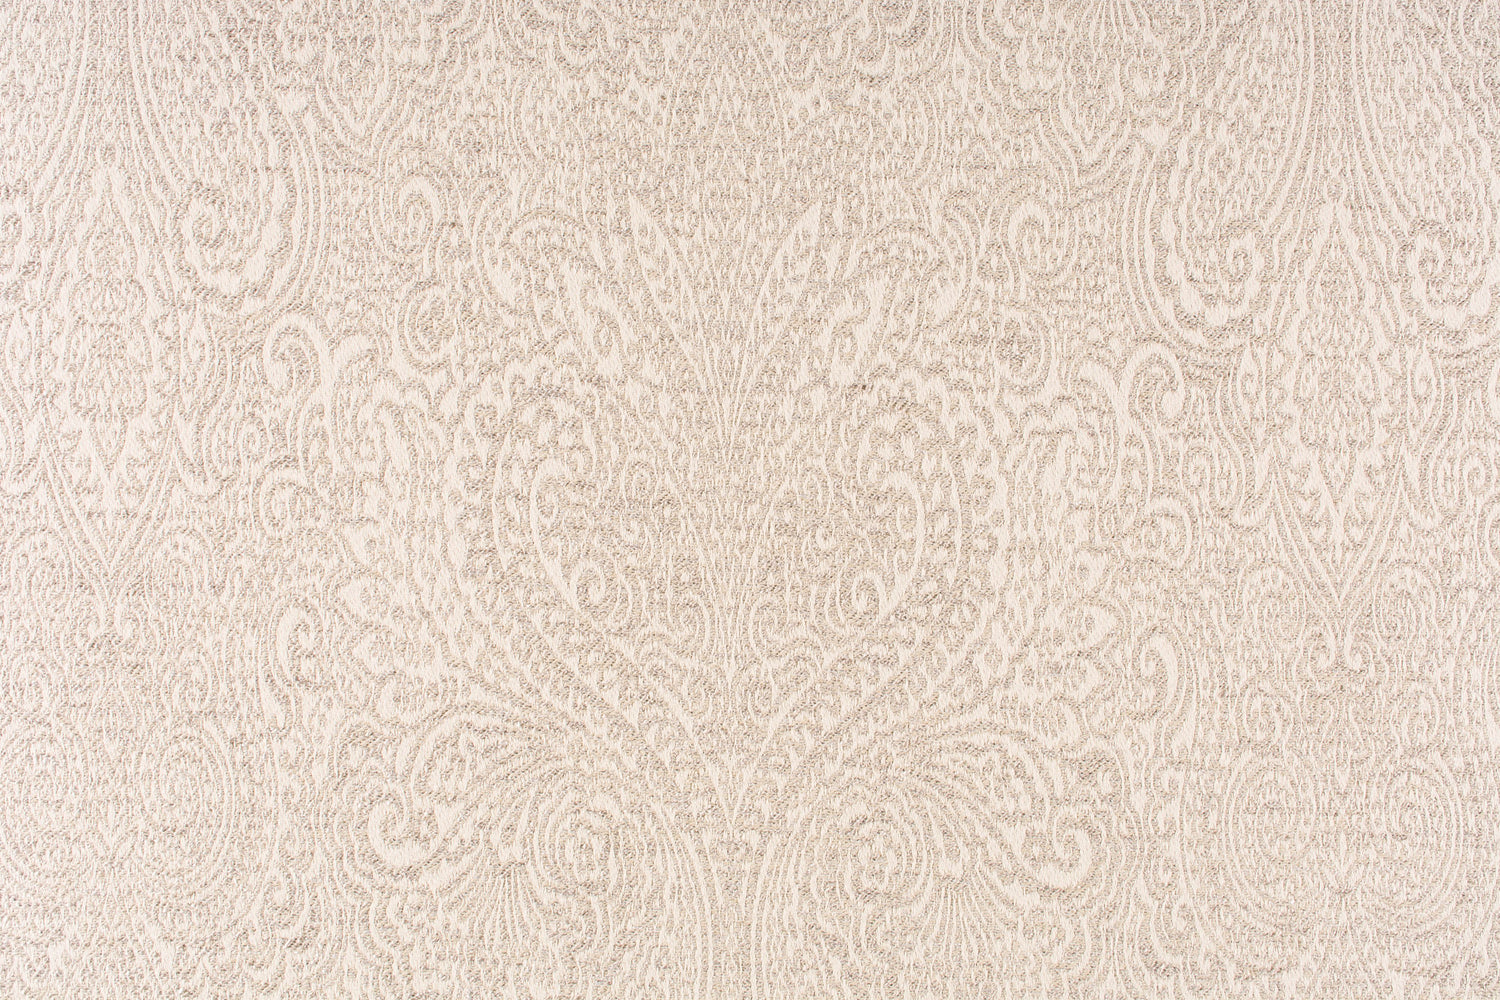 Avonaco fabric in ivory mist color - pattern number VN 0100TF13 - by Scalamandre in the Old World Weavers collection